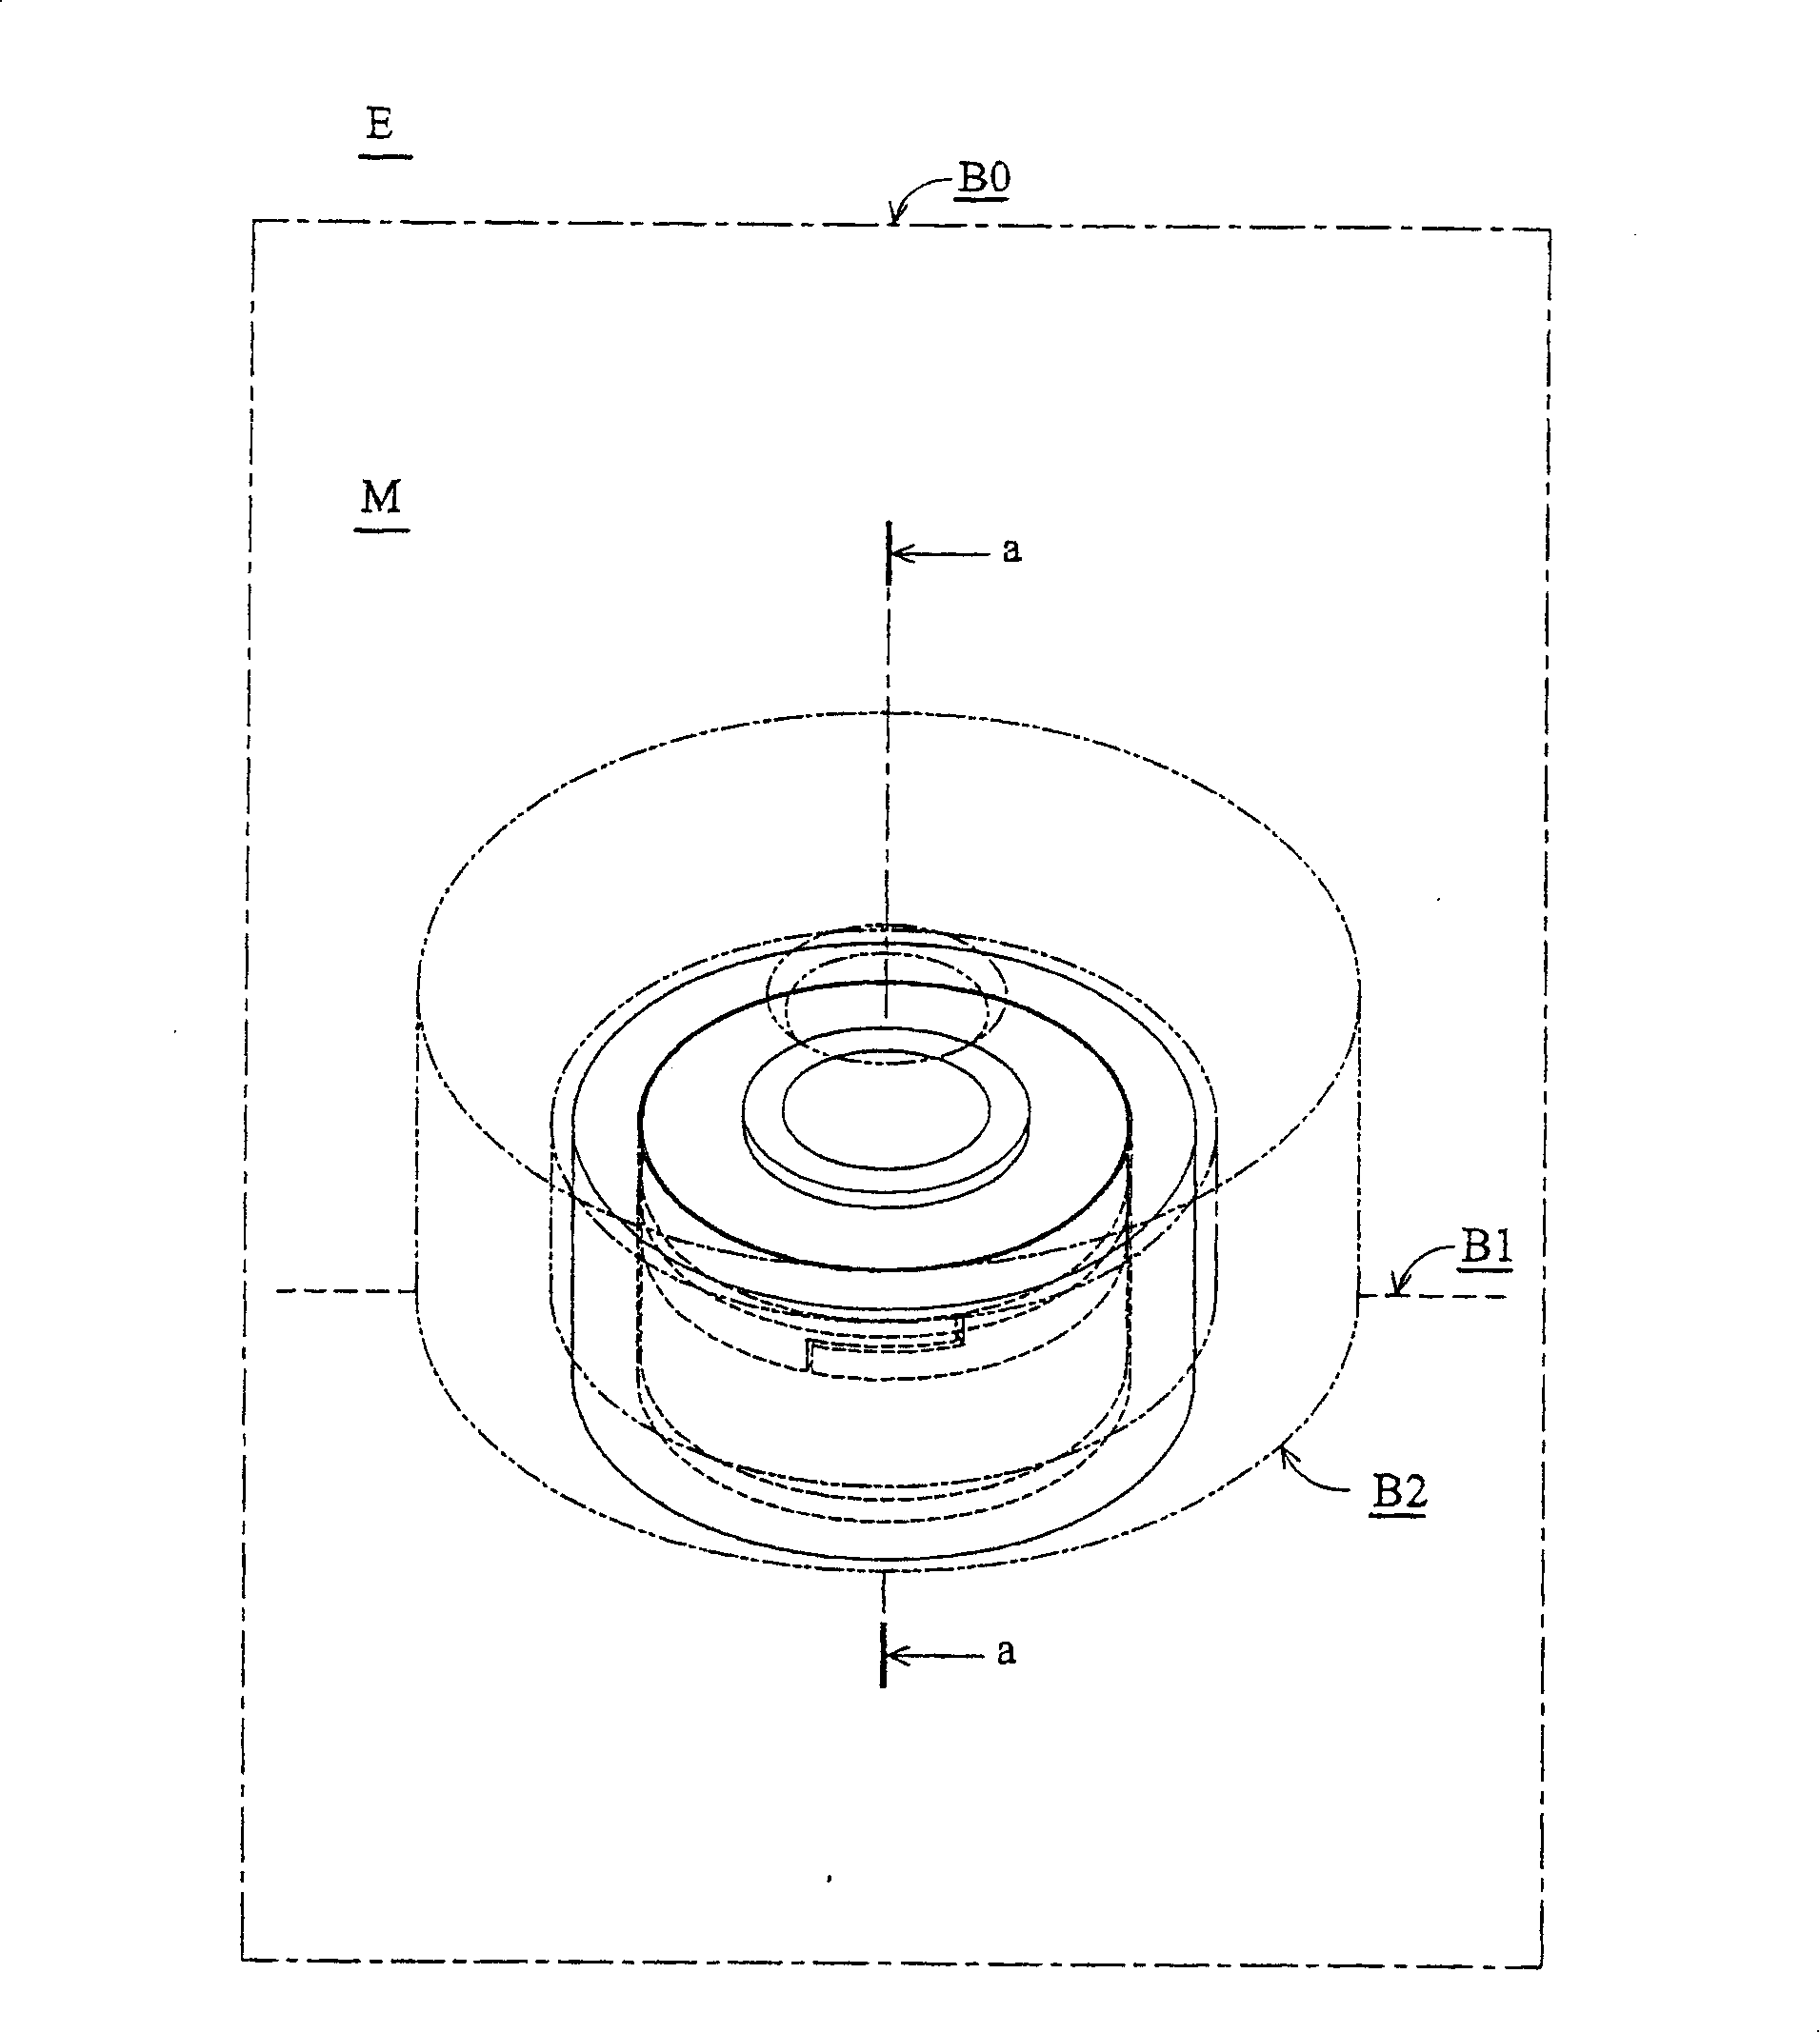 Sealing structure and its spacer component